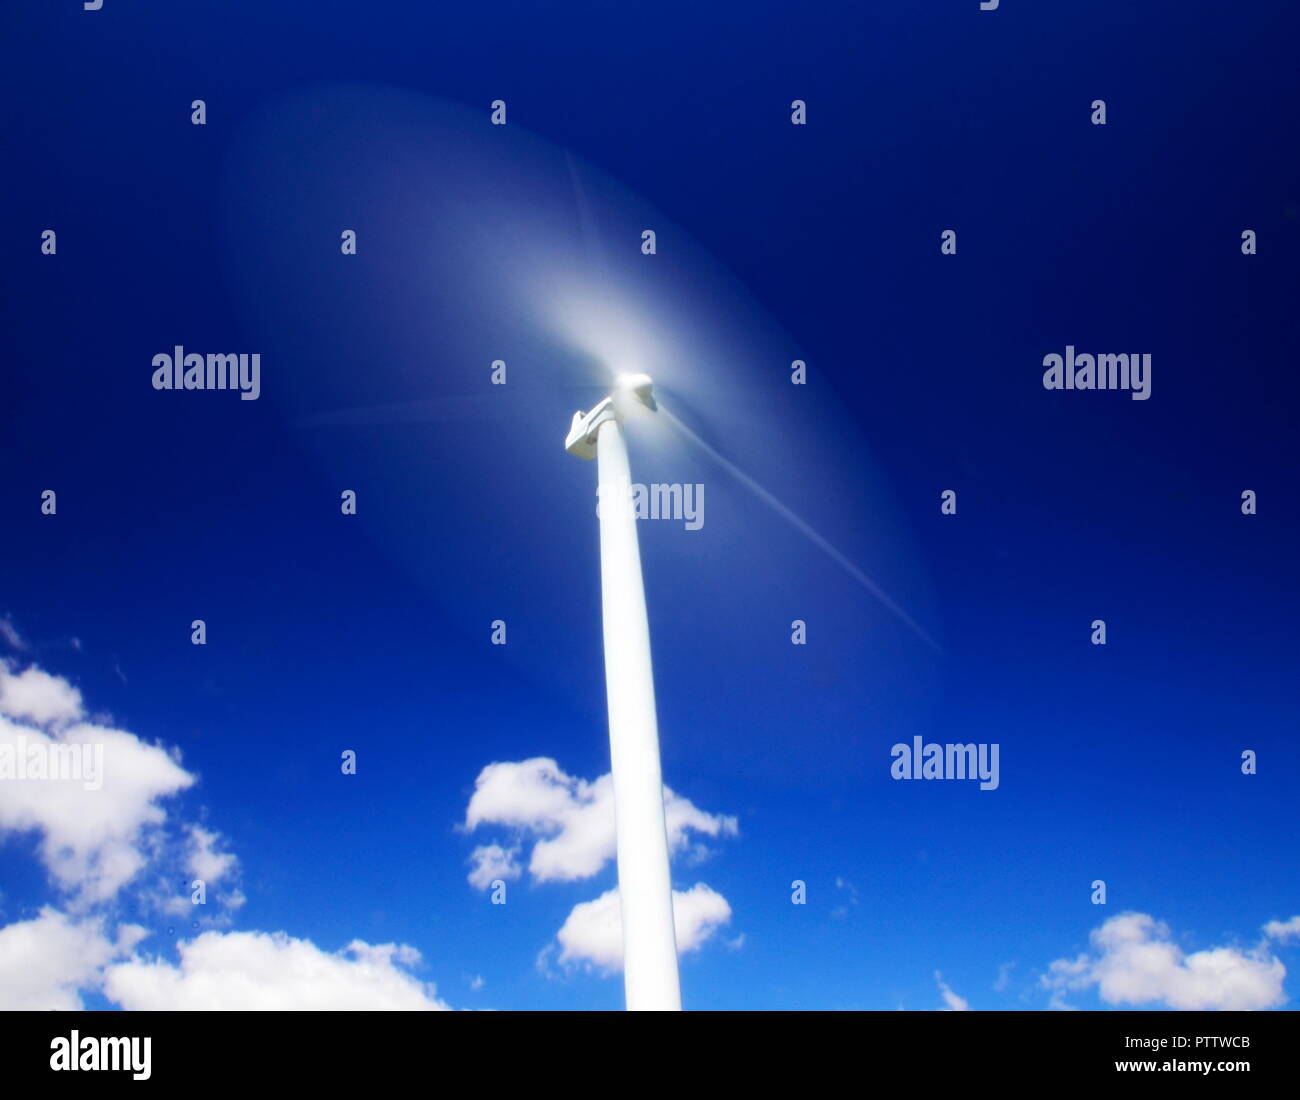 the metaphor of the future quickly approaching is the blades of a wind  turbine spinning faster than speed of light Stock Photo - Alamy